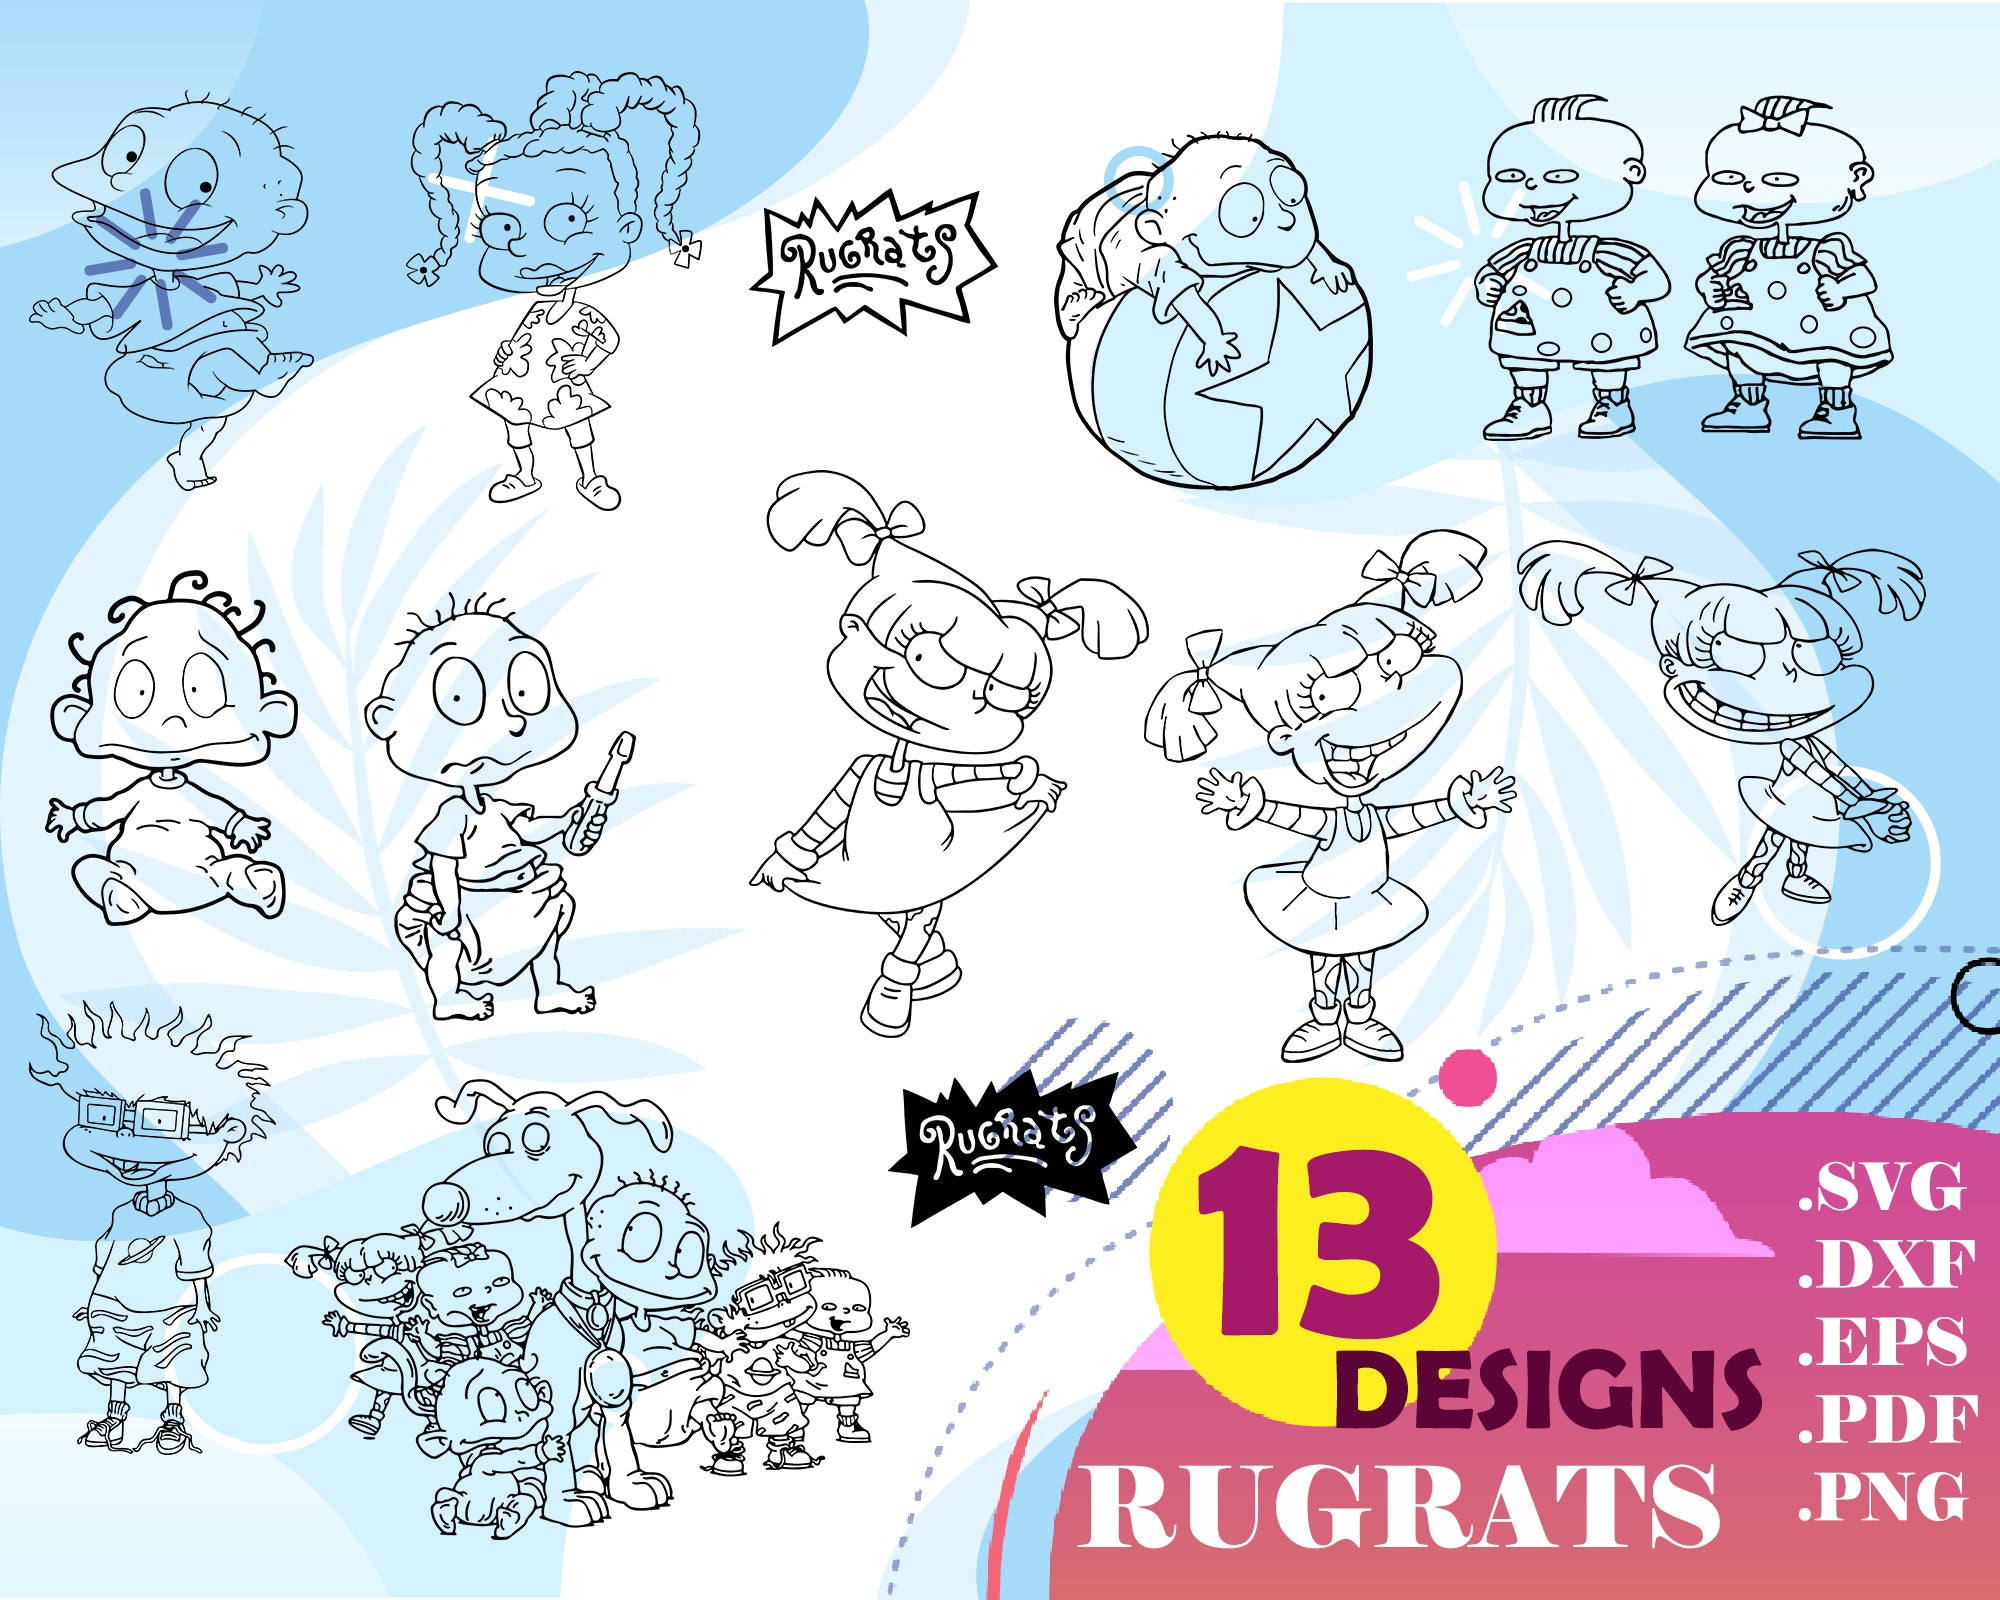 Download Rugrats Svg Rugrats Bundle Svg Susi Dil Tommy Angelica Chuckie A Clipartic